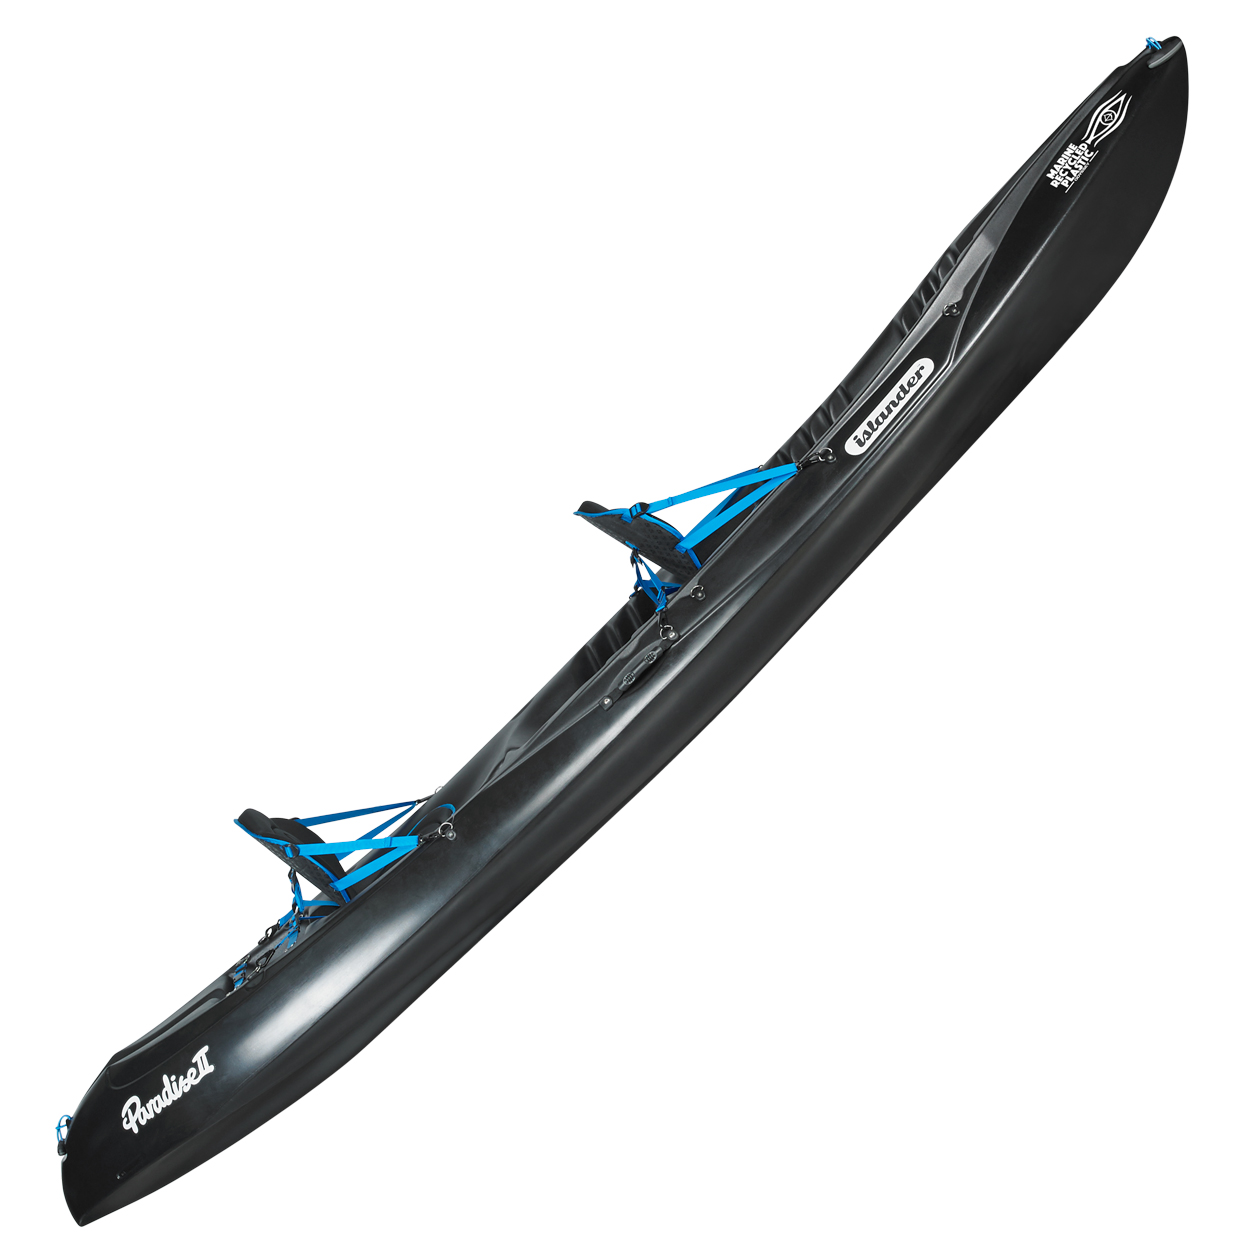 by Islander & Odyssey The World's Only Marine Recycled Double sit-on-top kayak 